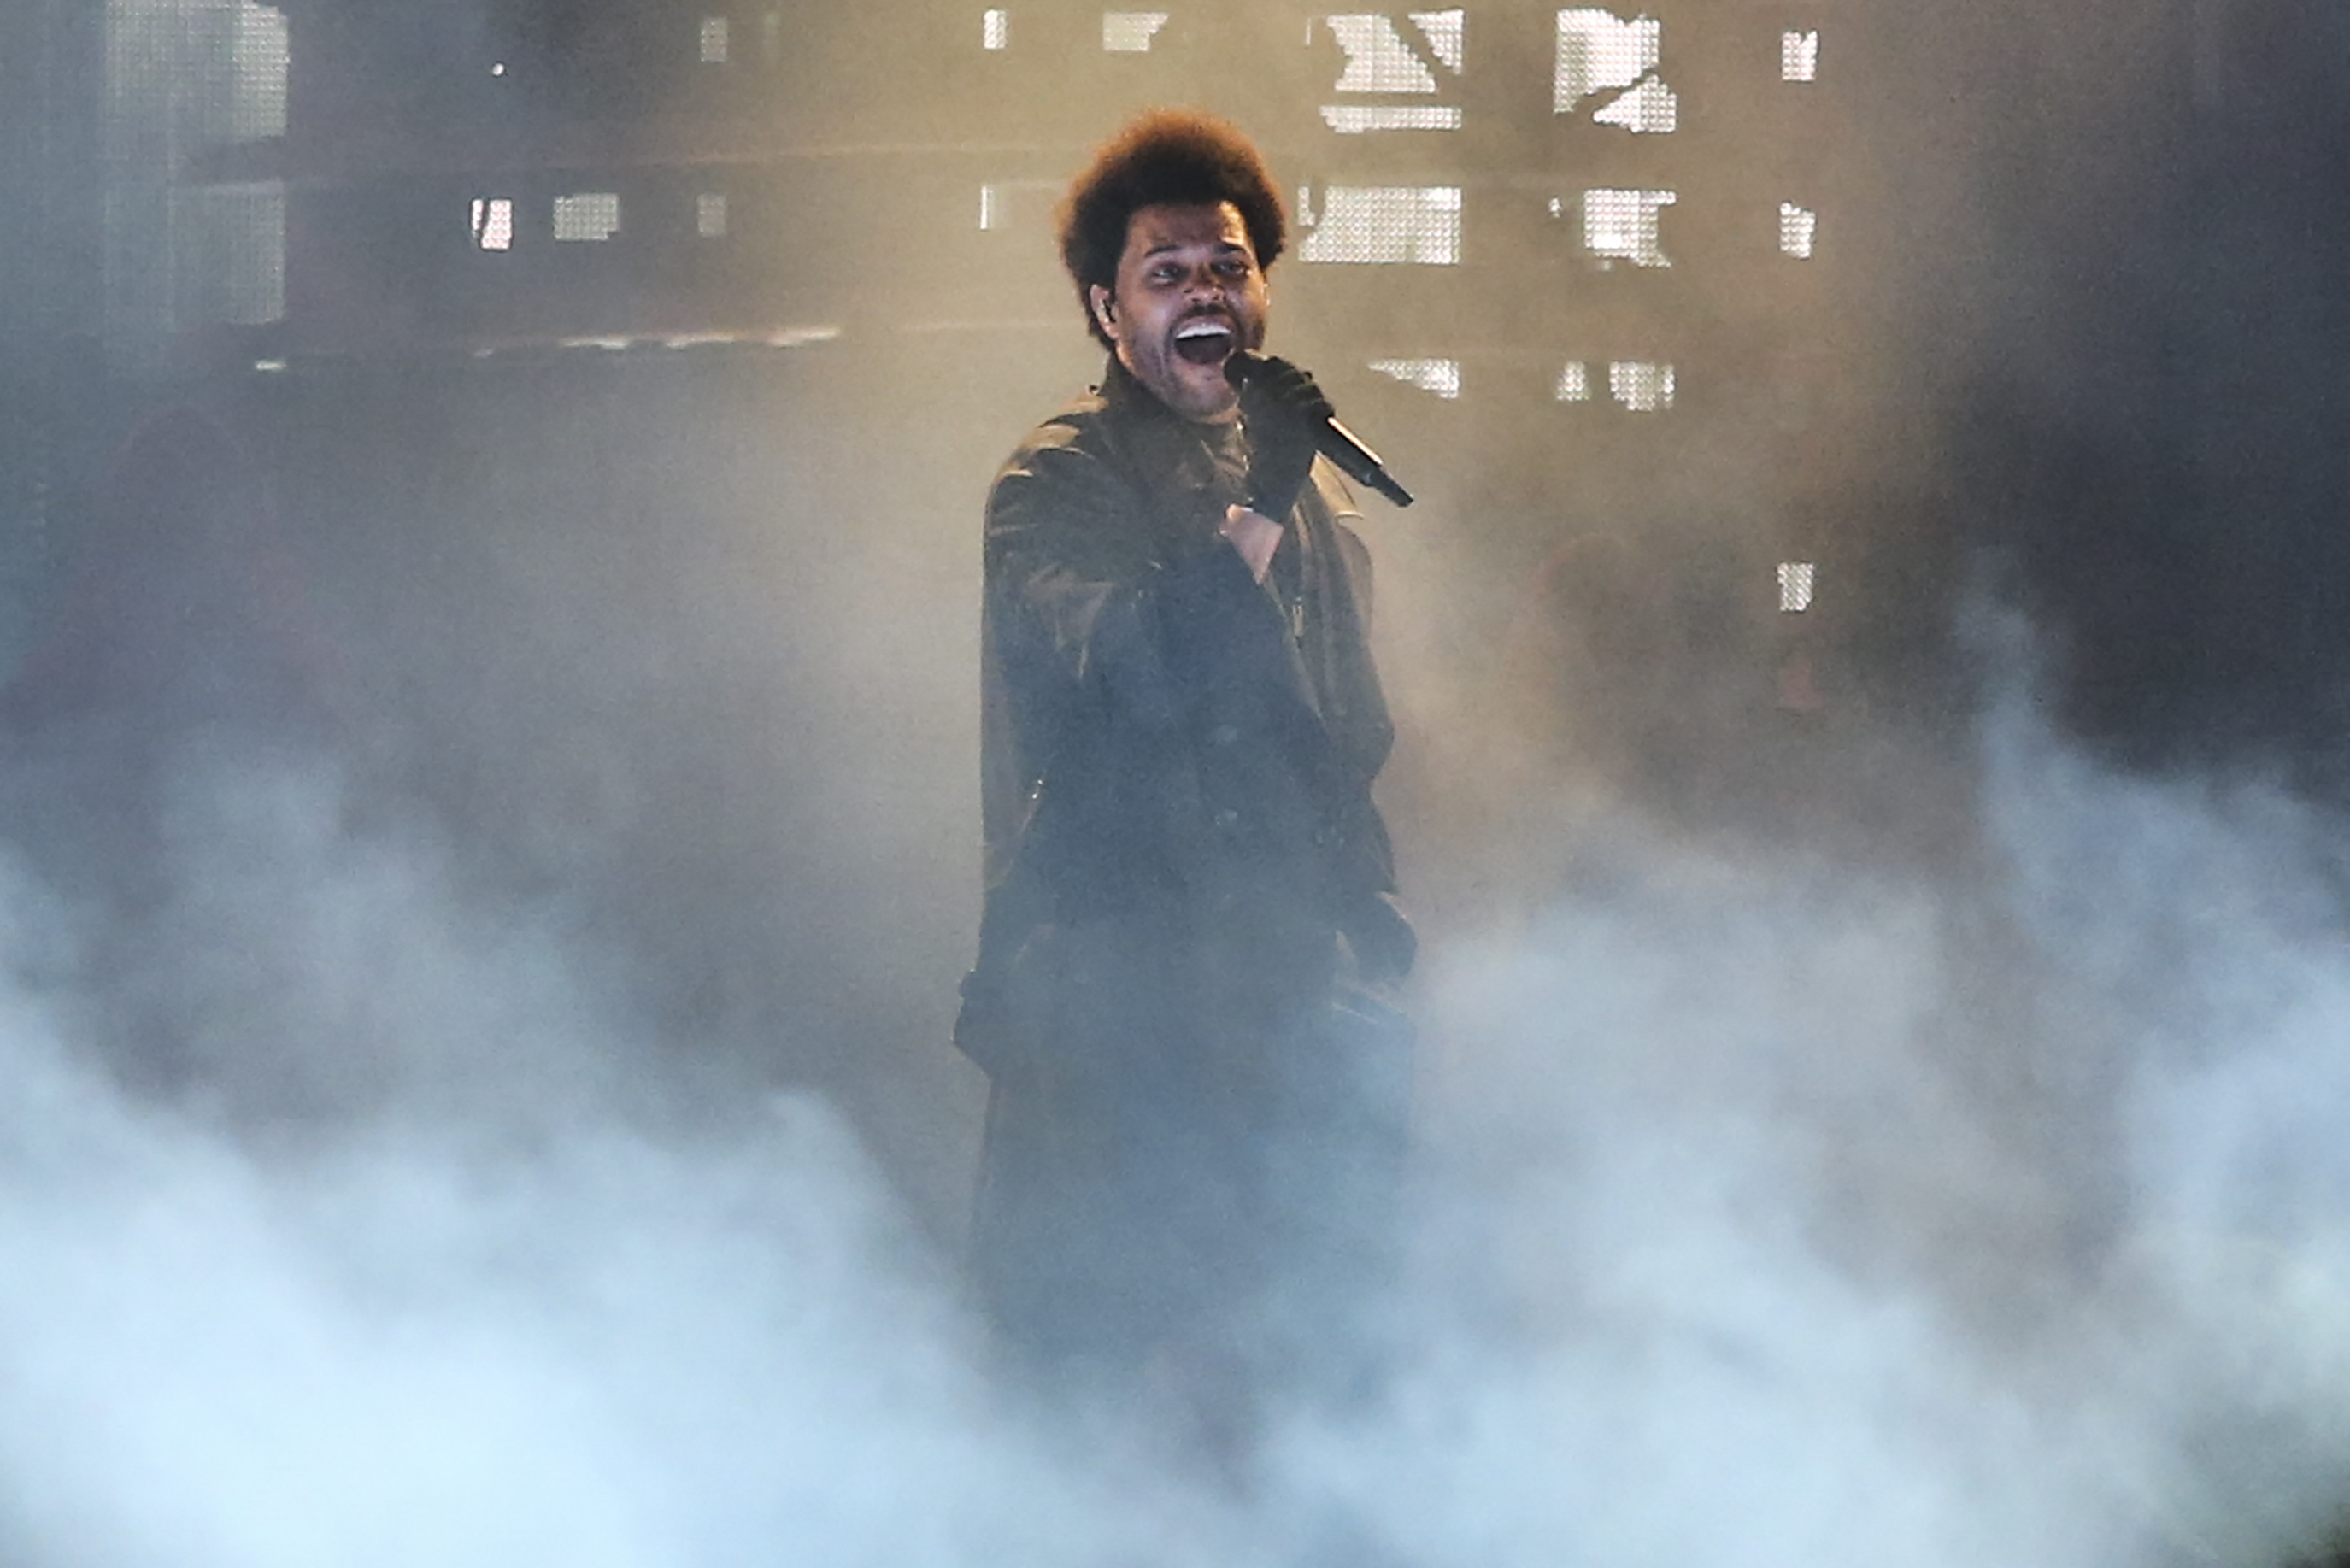 The Weeknd has felt inspired and is working on new music